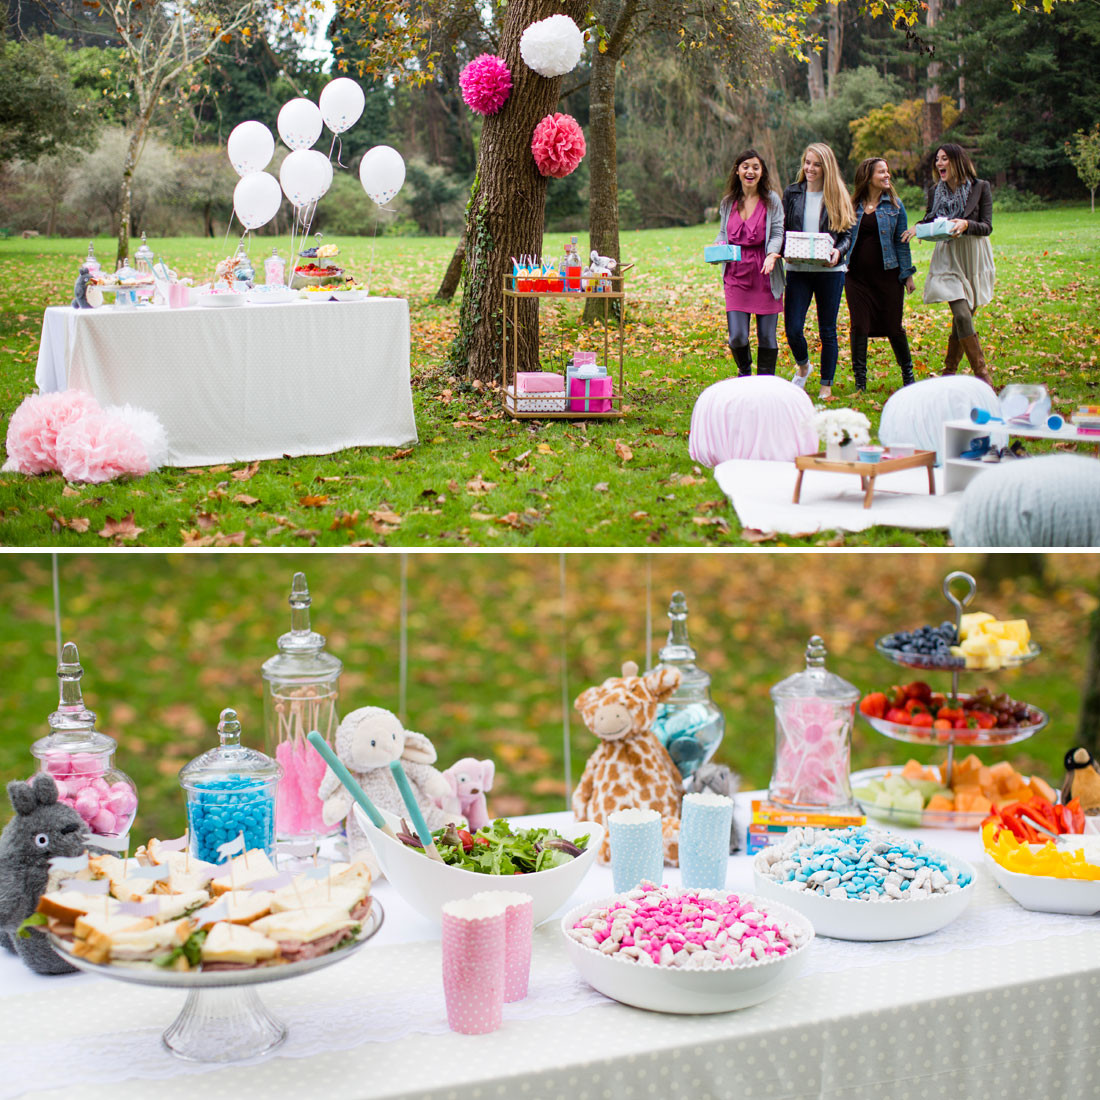 Baby Shower Decor Images
 Summer Inspired Outdoor Baby Shower Decoration Ideas